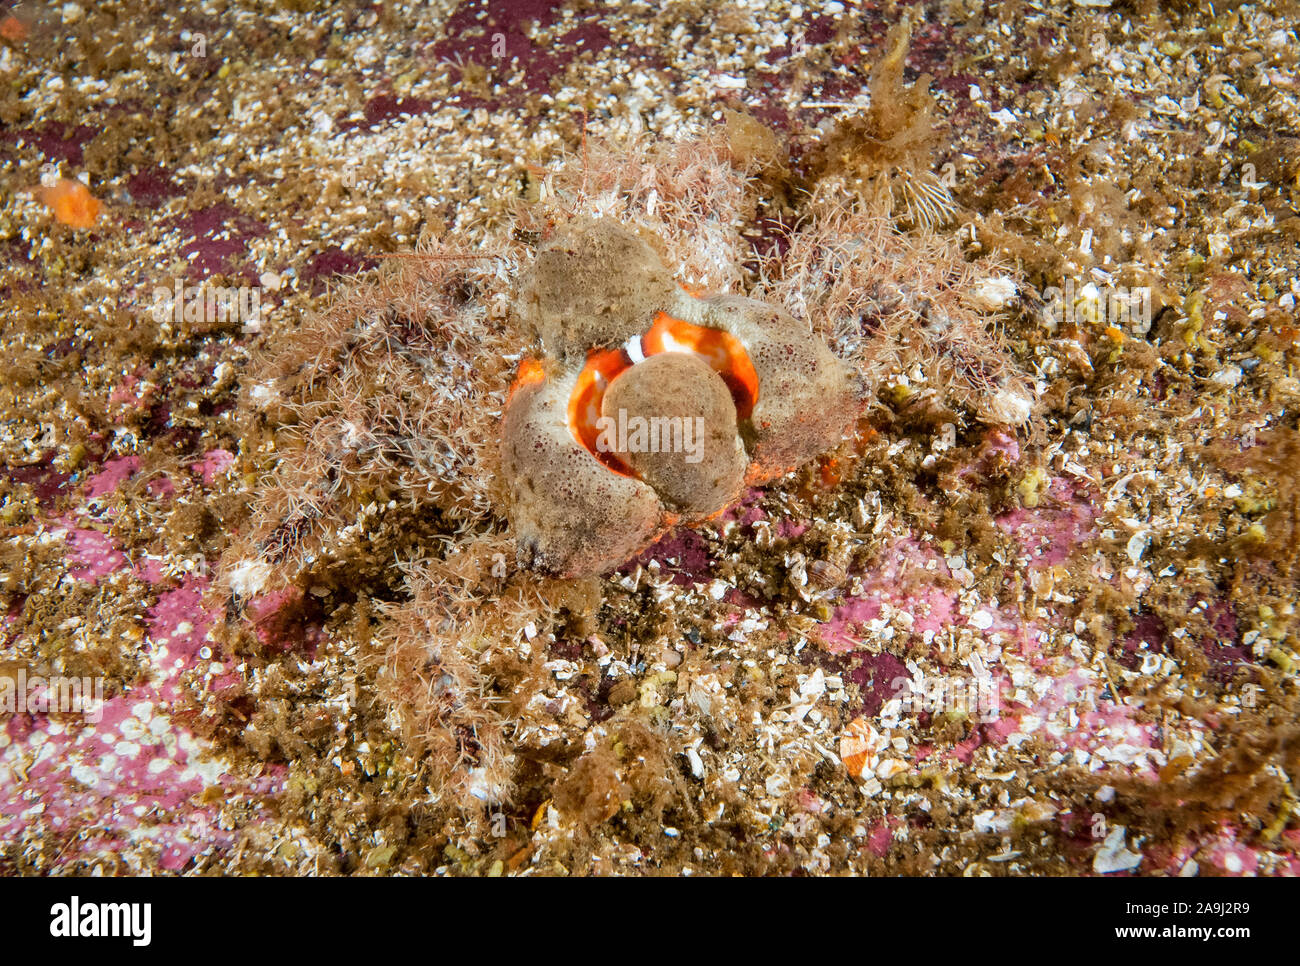 heart crab, or flatspine triangle crab, Phyllolithodes papillosus, Sechelt Inlet, British Columbia, Canada, Pacific Ocean Stock Photo